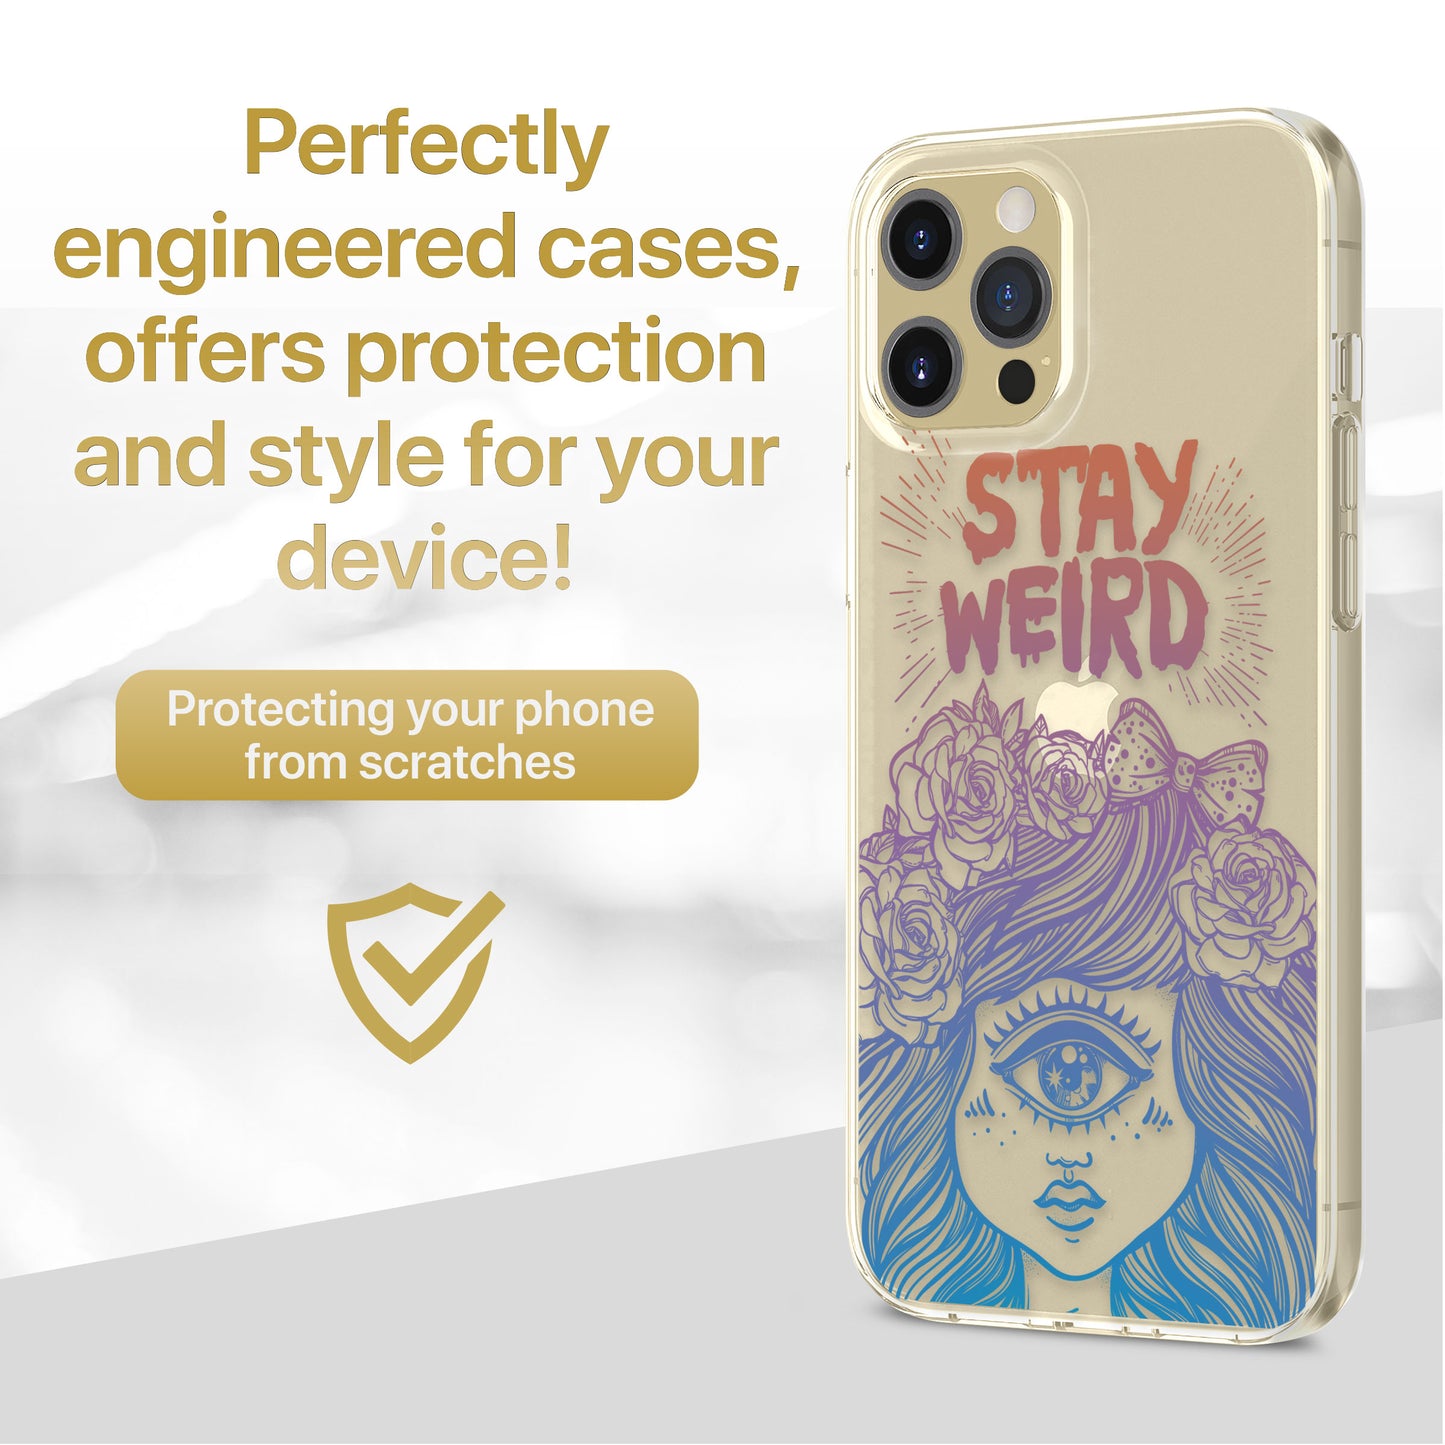 TPU Clear case with (Stay Weird) Design for iPhone & Samsung Phones